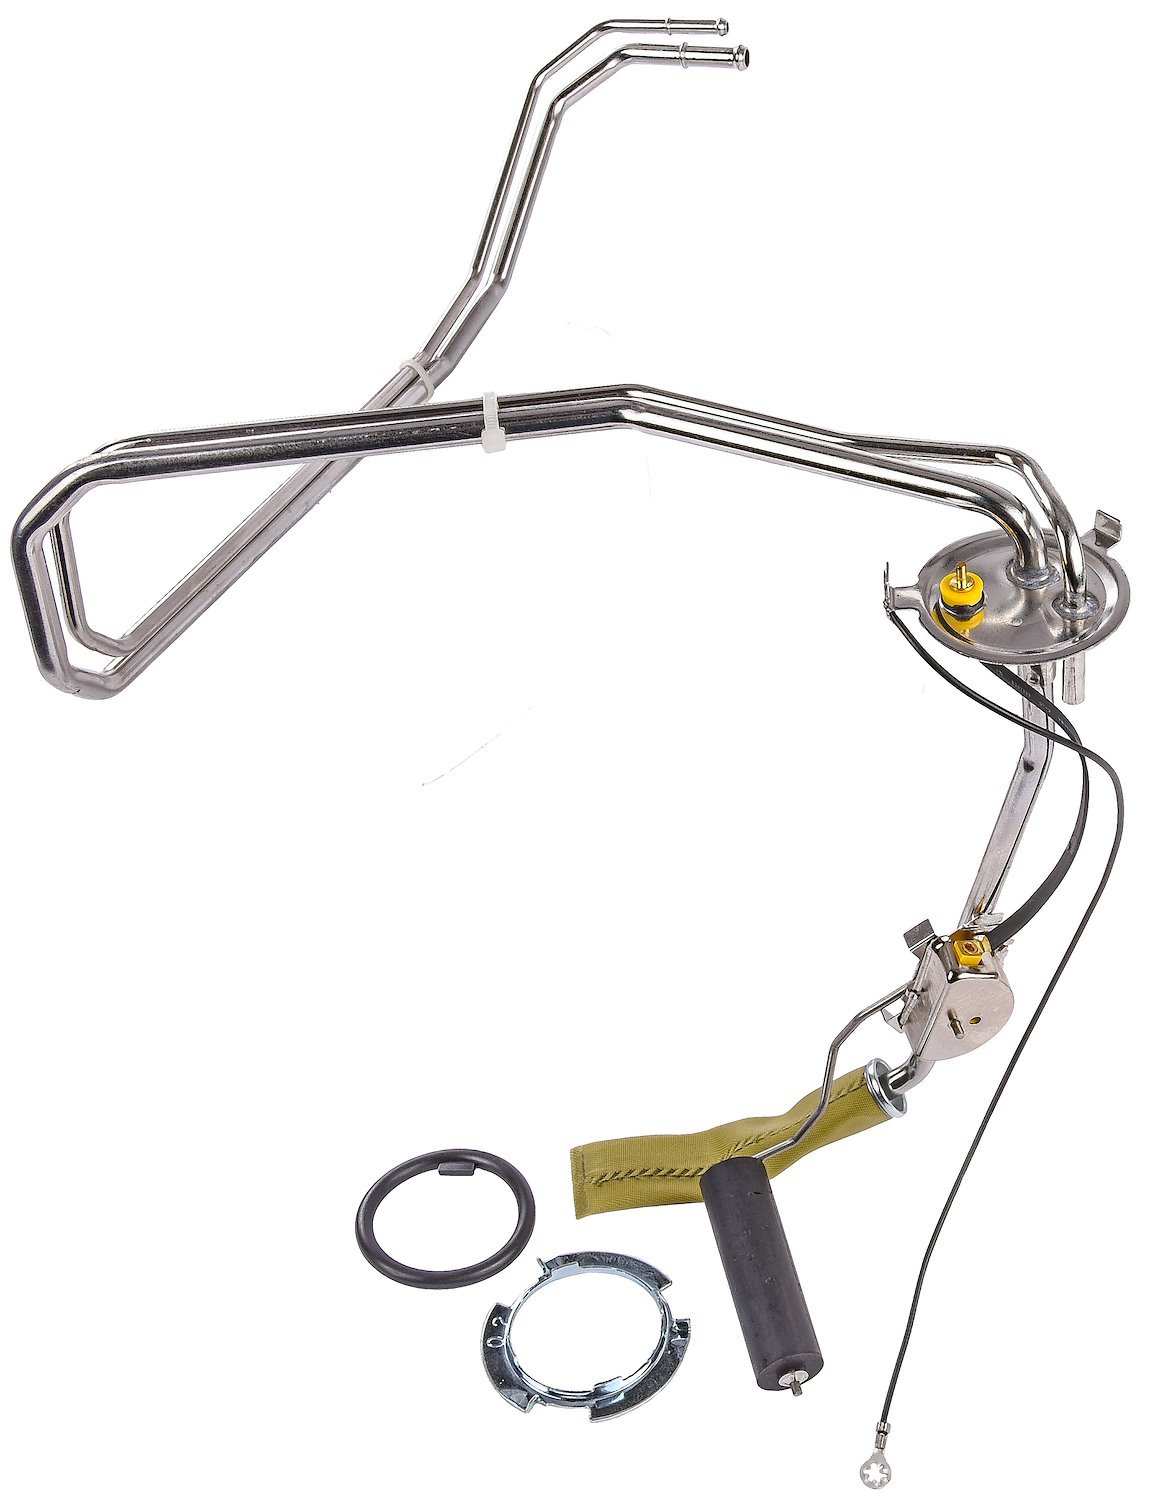 Fuel Tank Sending Unit for 1976-1981 Camaro and